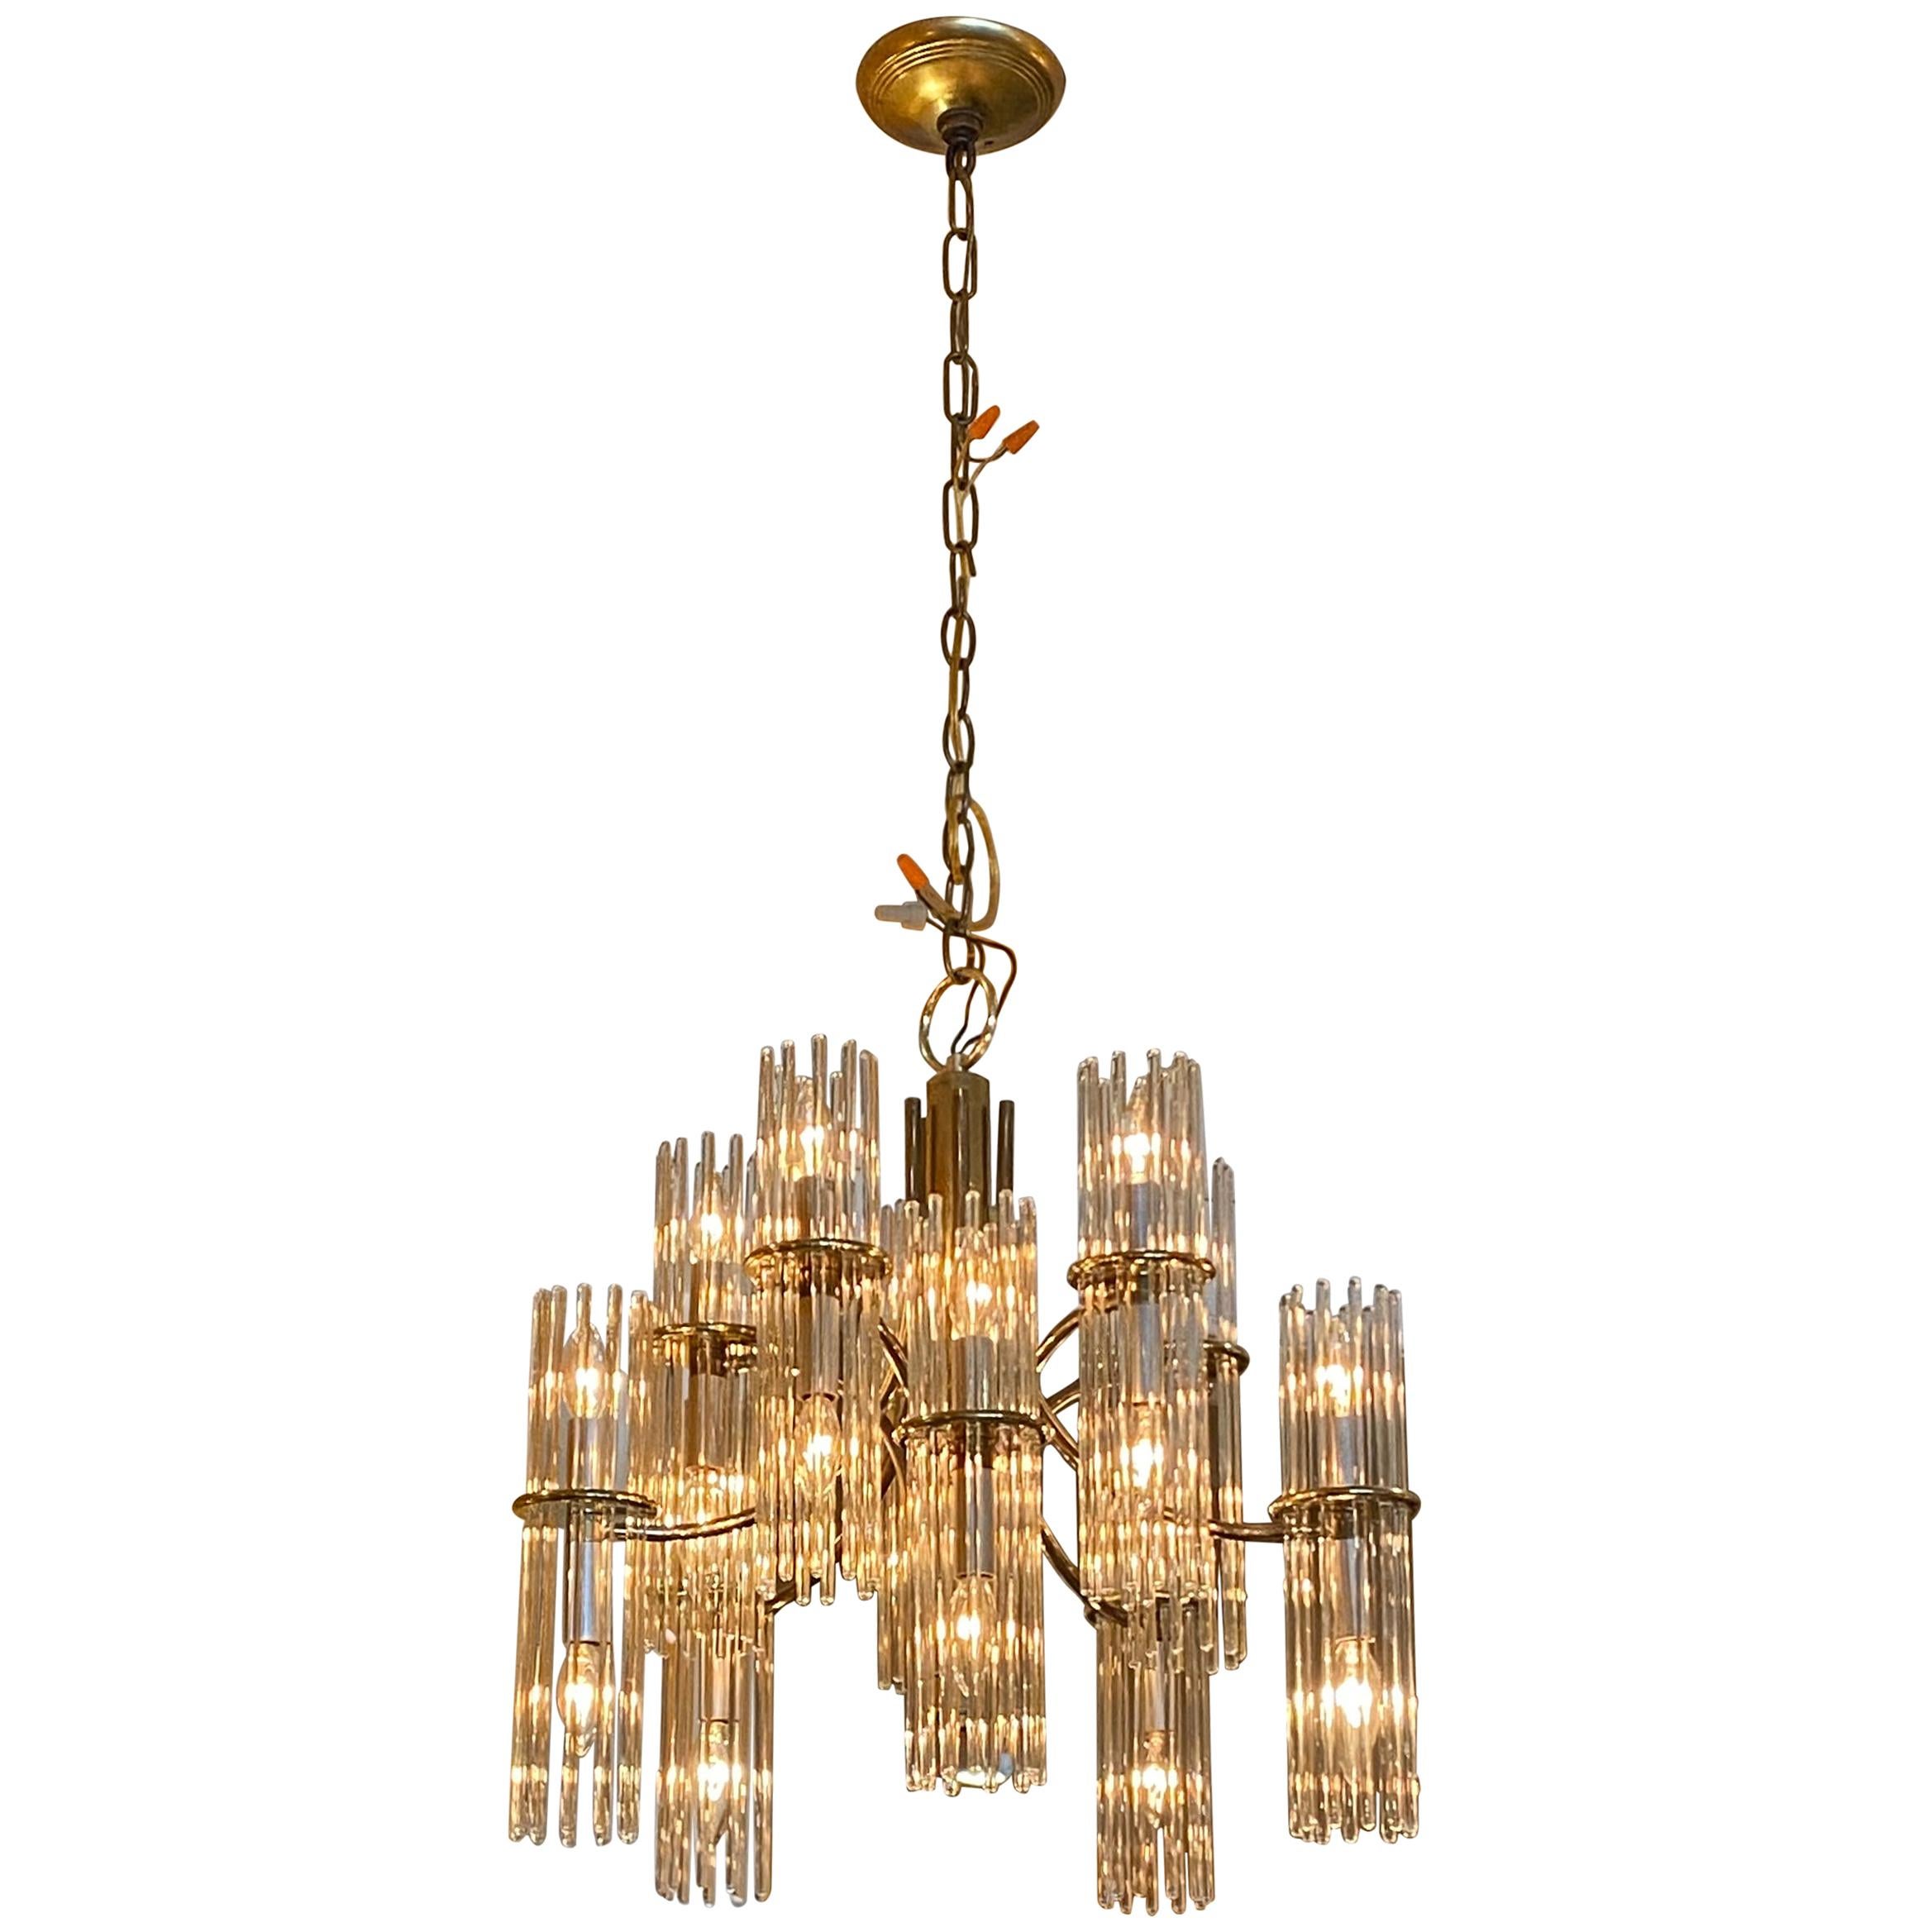 Brass-Plated 10 Arm Midcentury Chandelier with Glass Prisms